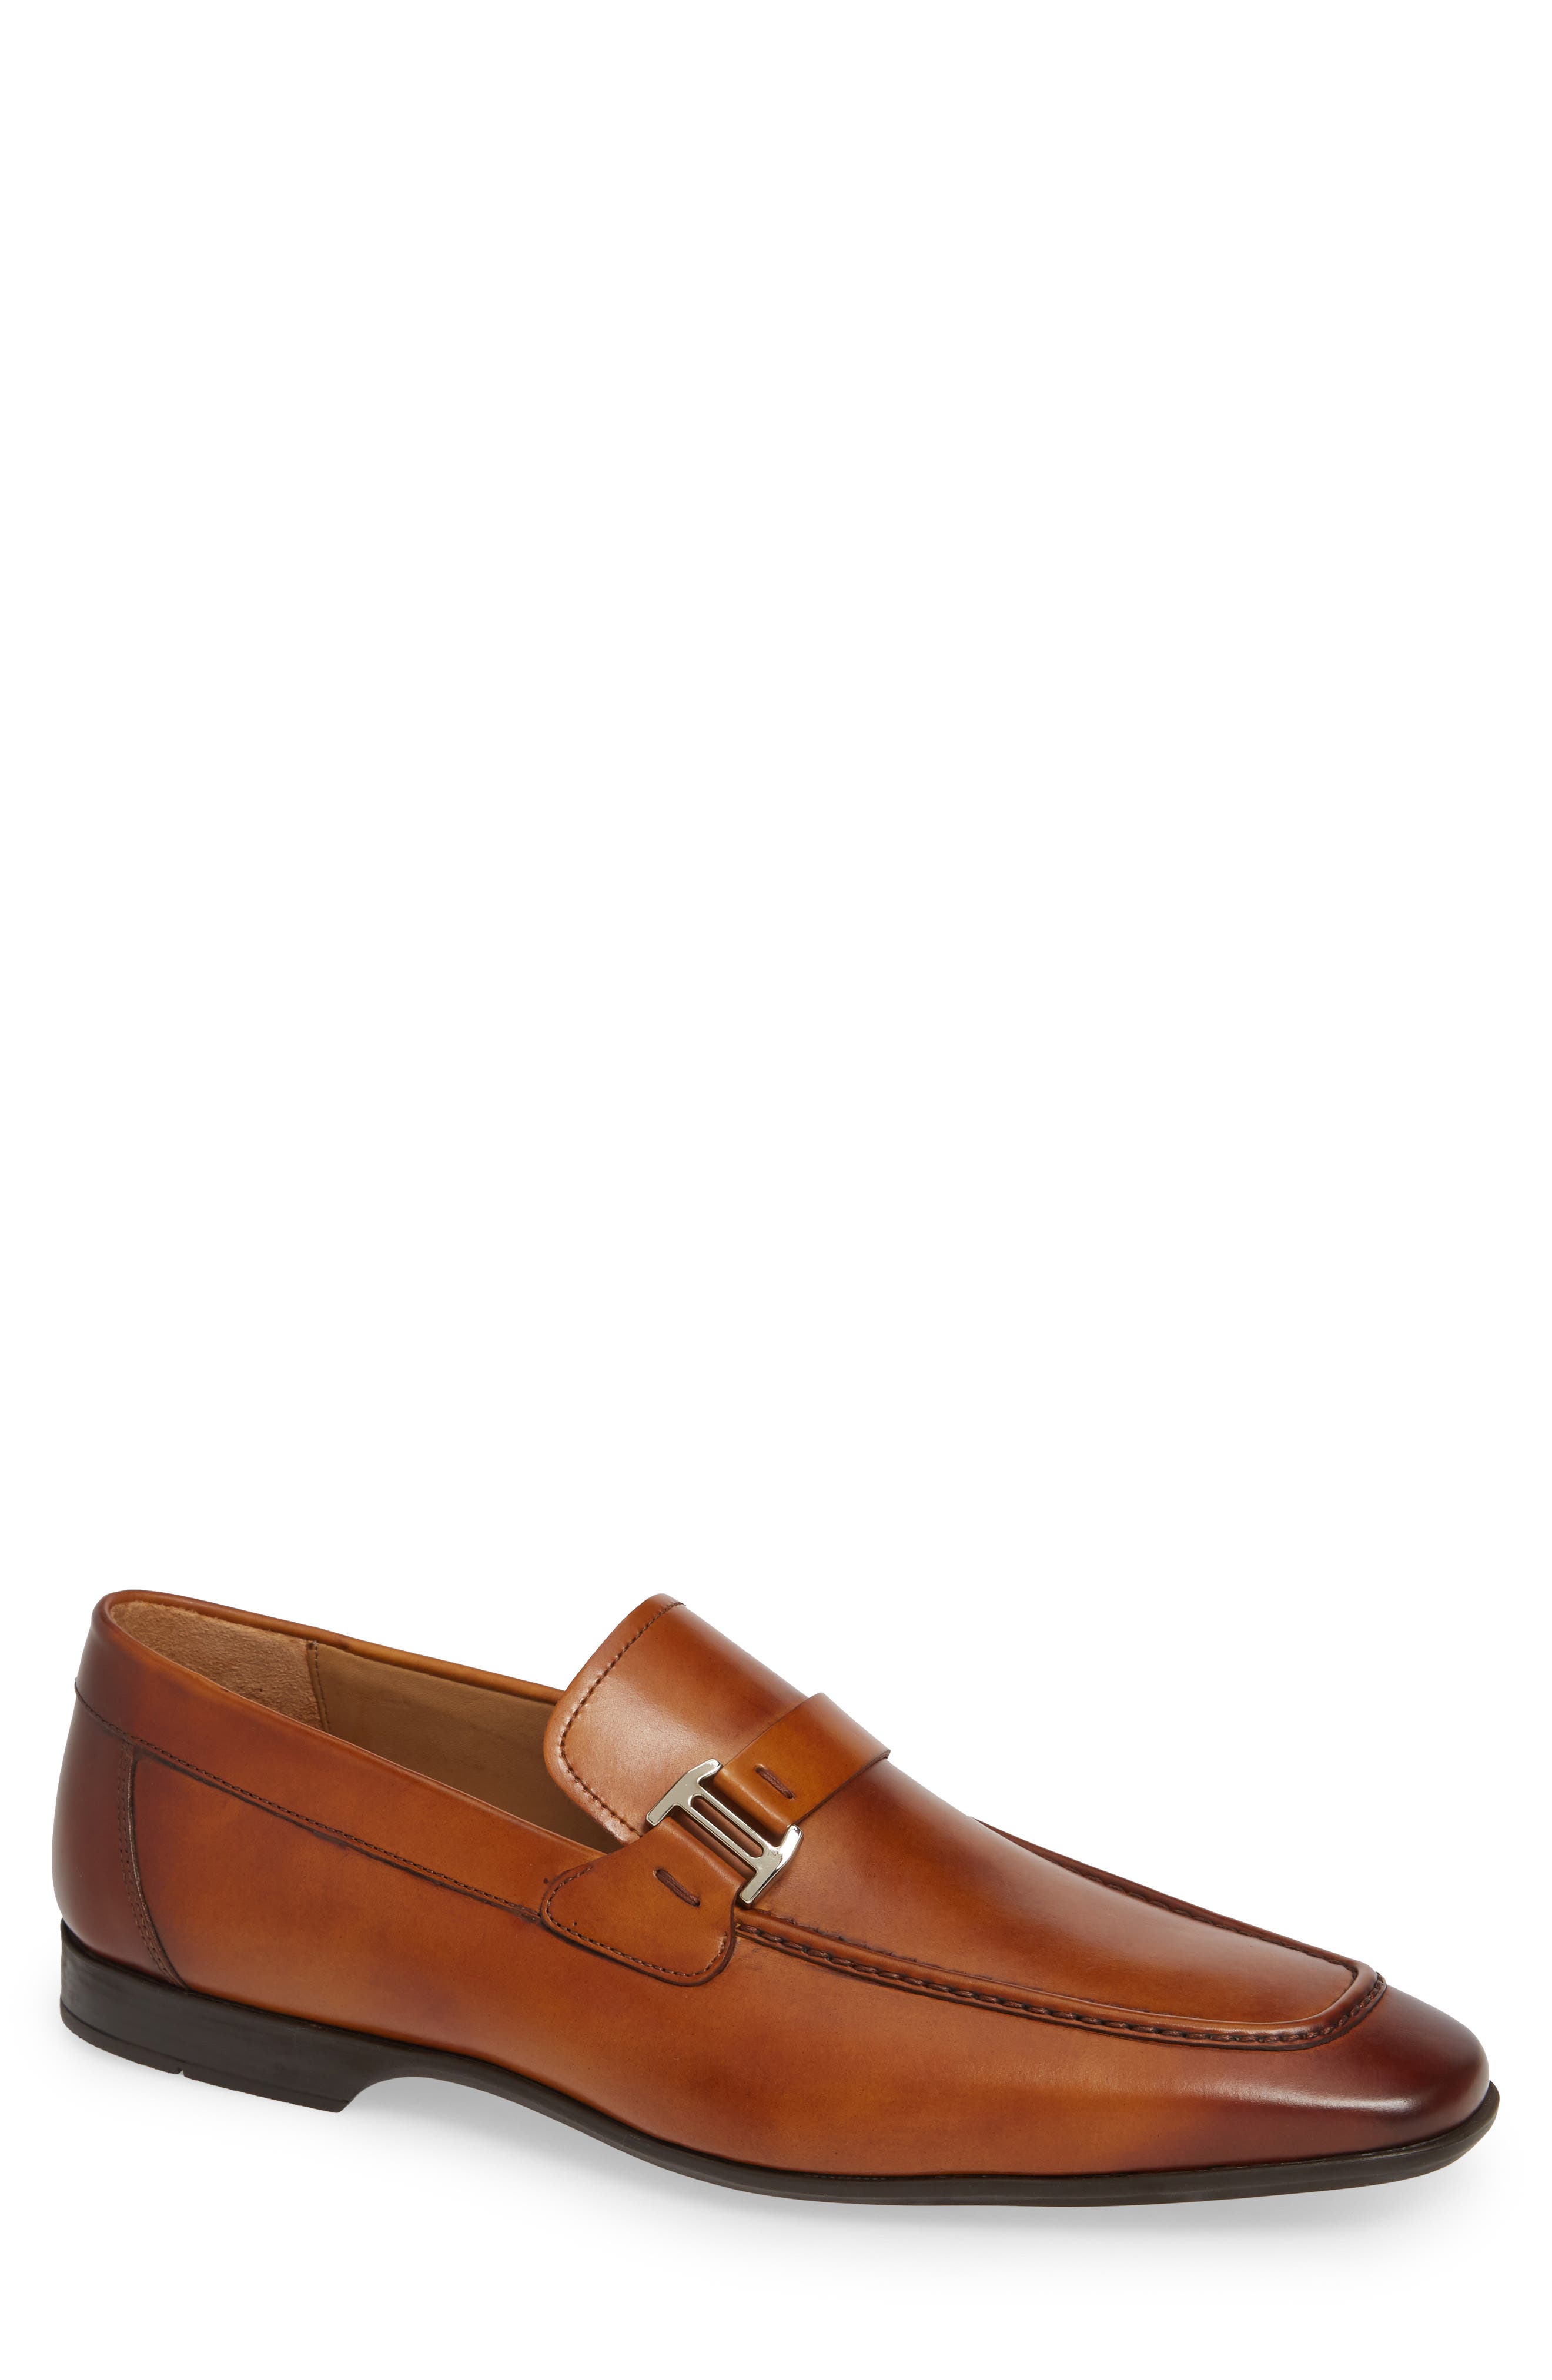 magnanni shoes price